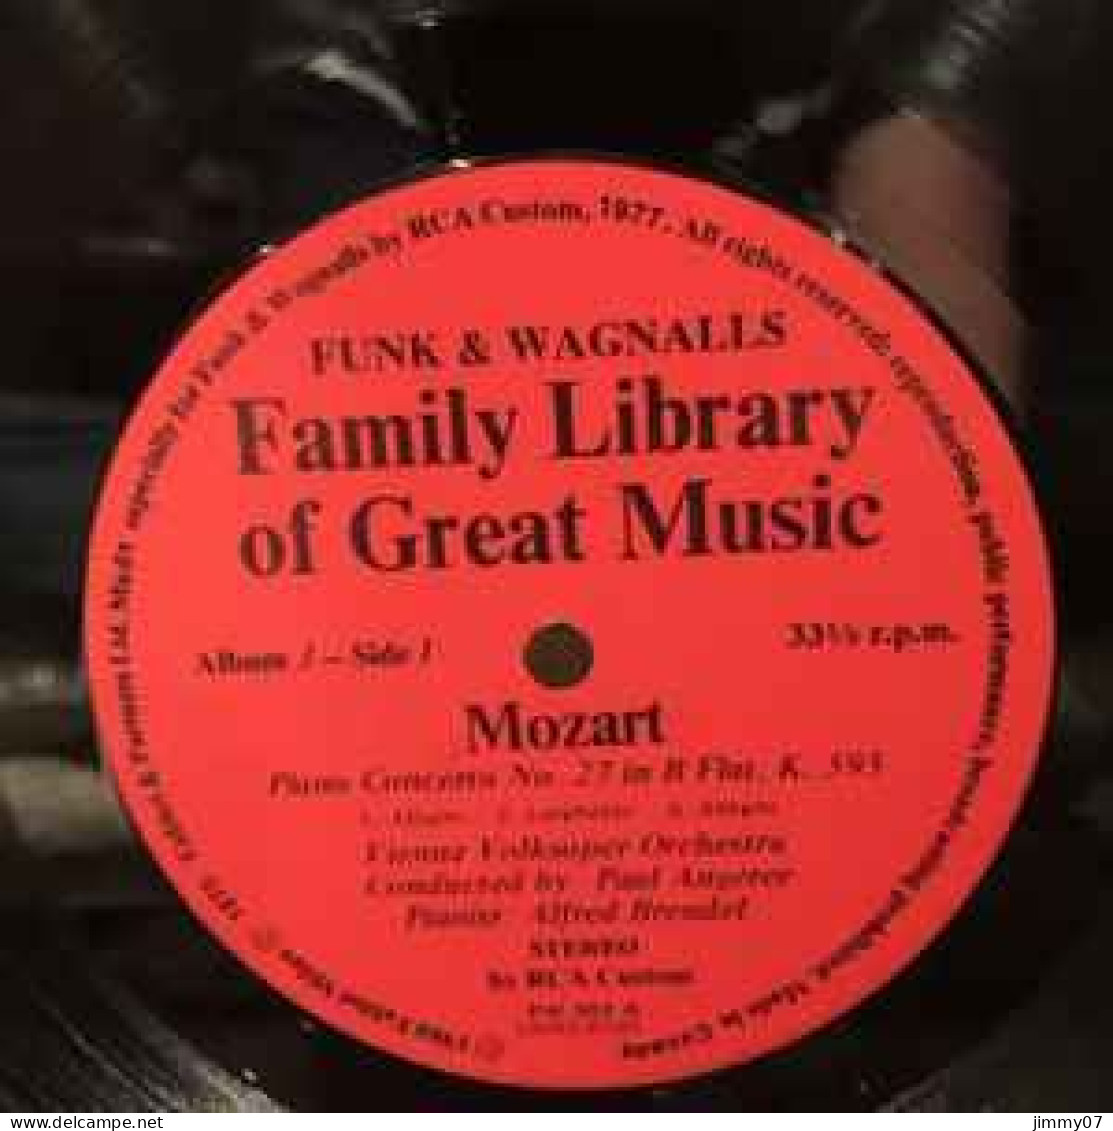 Various, Mozart - The Piano Concerto In B Flat - Funk & Wagnalls Family Library Of Great Music - Album 3 (LP, Comp) - Classical